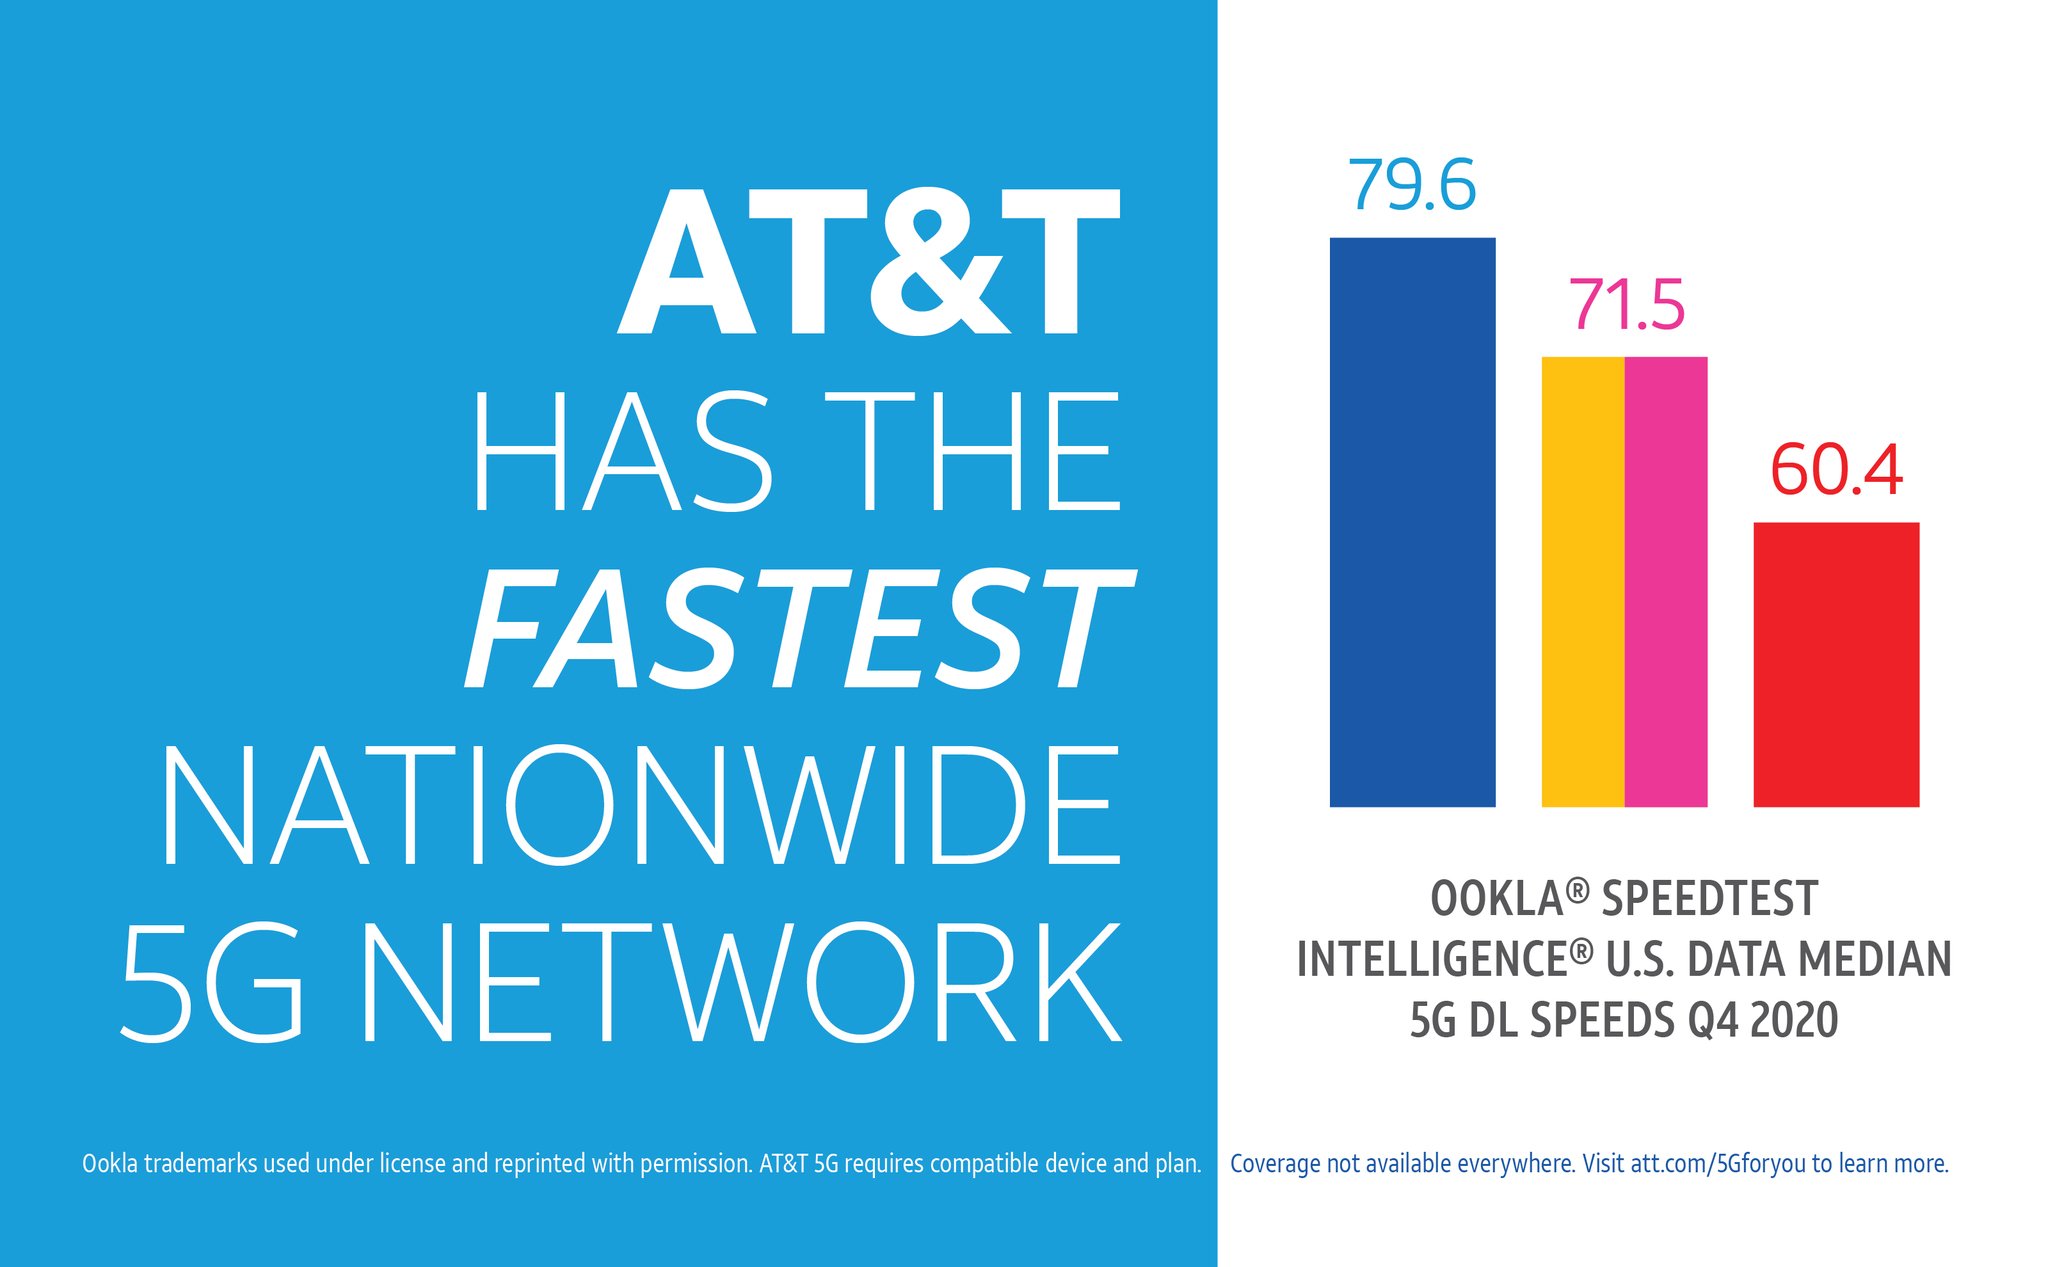 The fastest 5G network yet to launch its new Samsung Galaxy S21, as claimed by AT&T